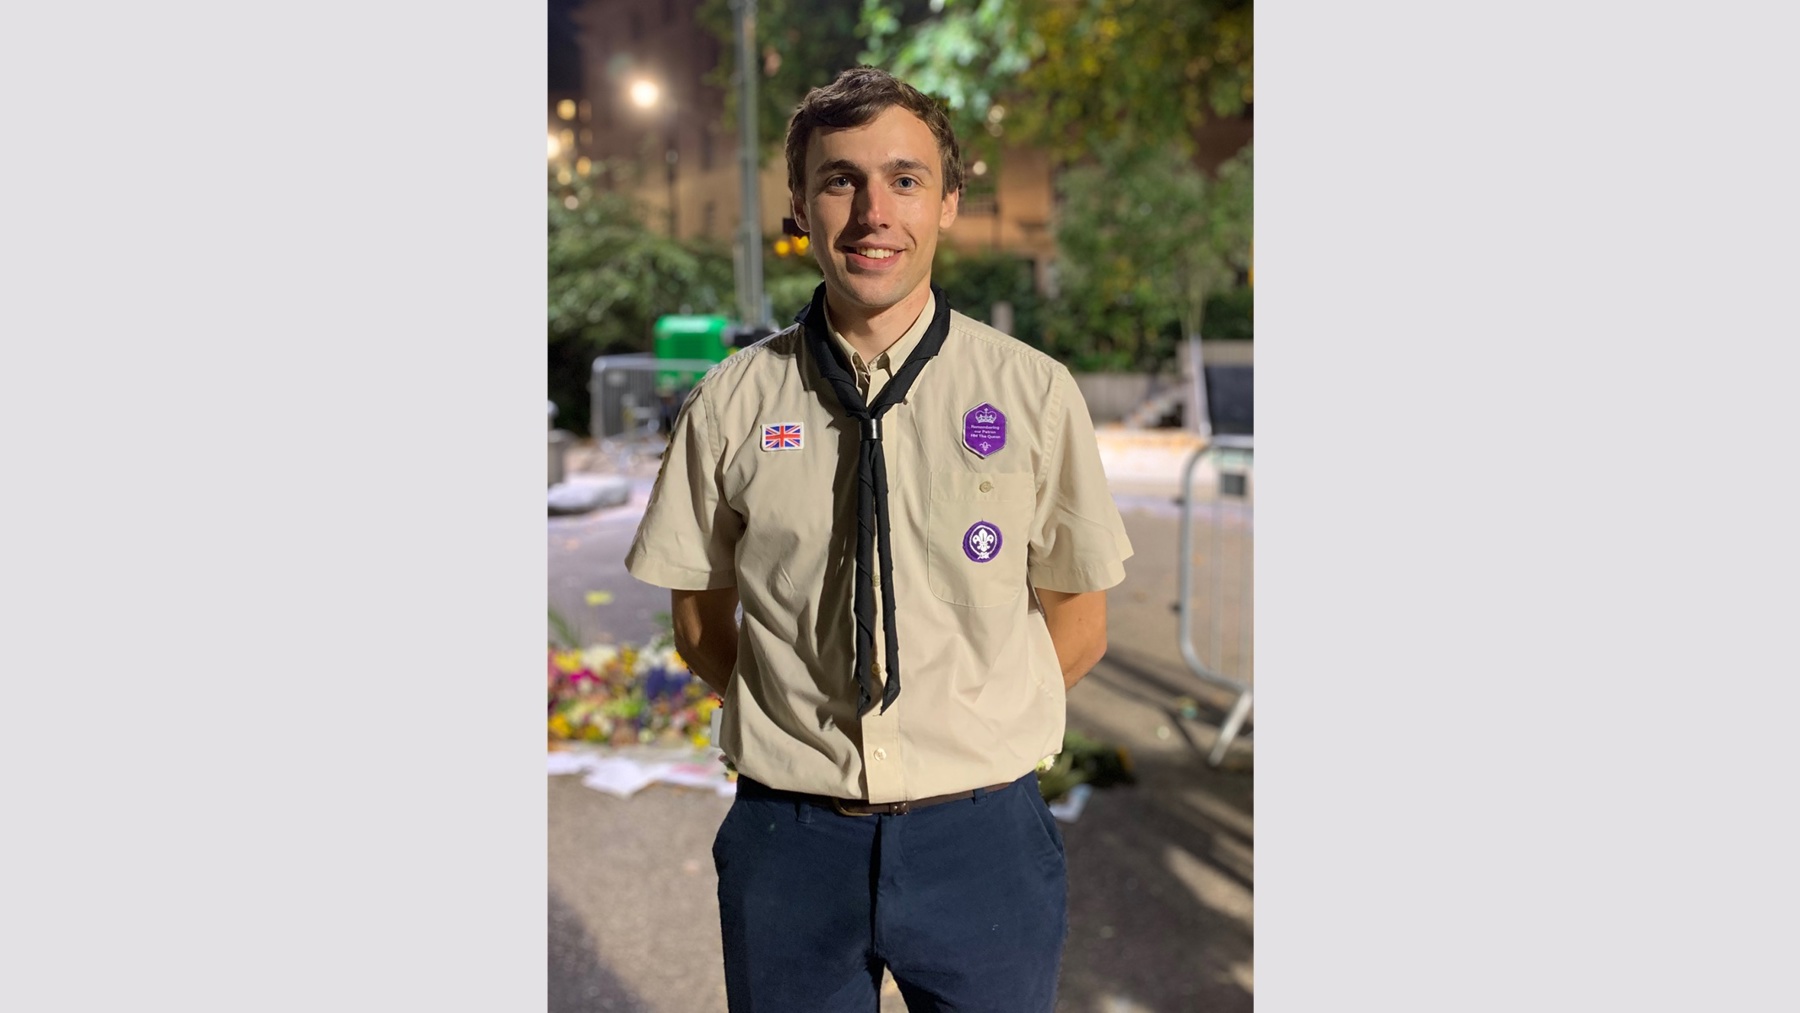 Aaron is standing with his hands behind his back and is wearing his Scouts uniform. He's wearing a beige shirt with badges on and a black necker. He's stood outside at night and there's a streetlight on in the distance. Behind him blurred in the background are flowers and a metal railing.